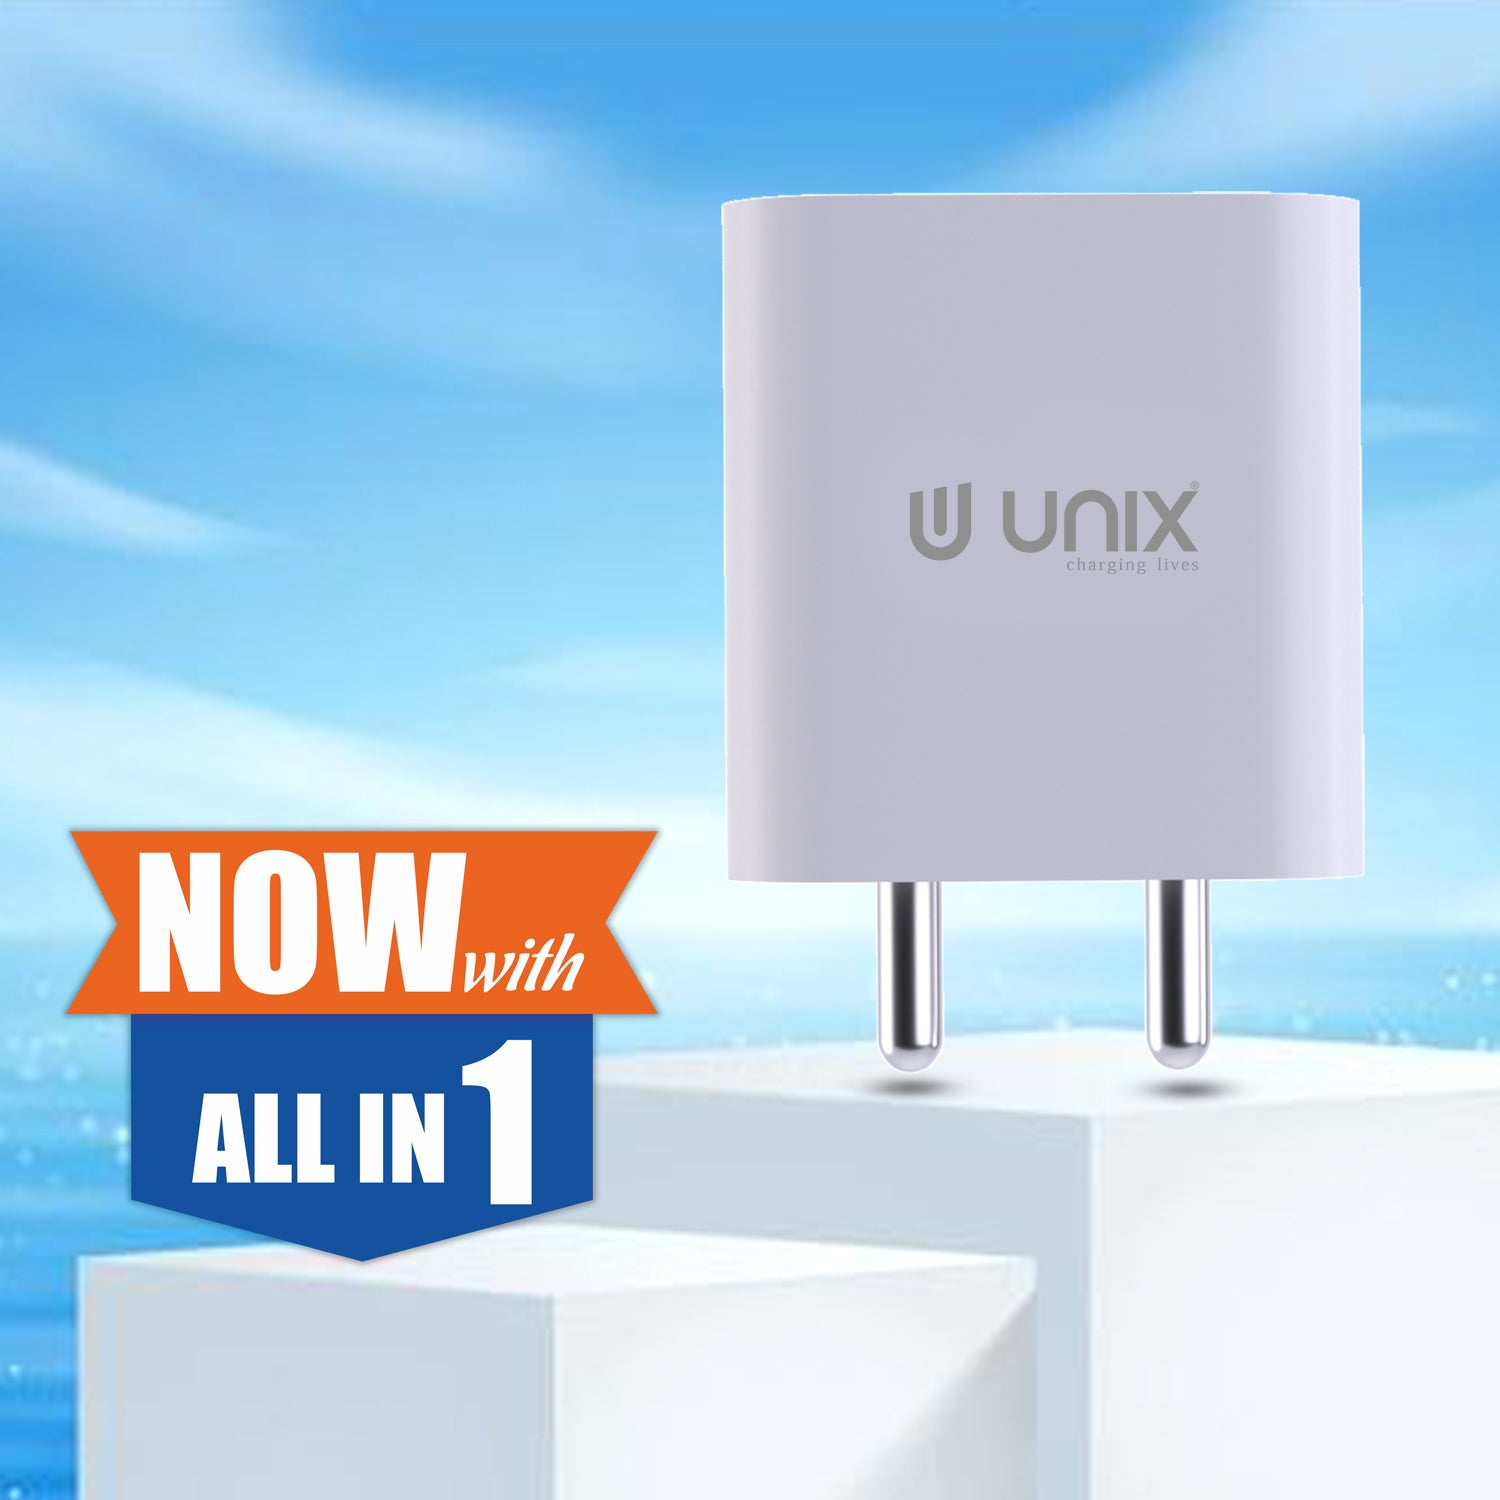 Unix UX-221 25W PD Fast Charger